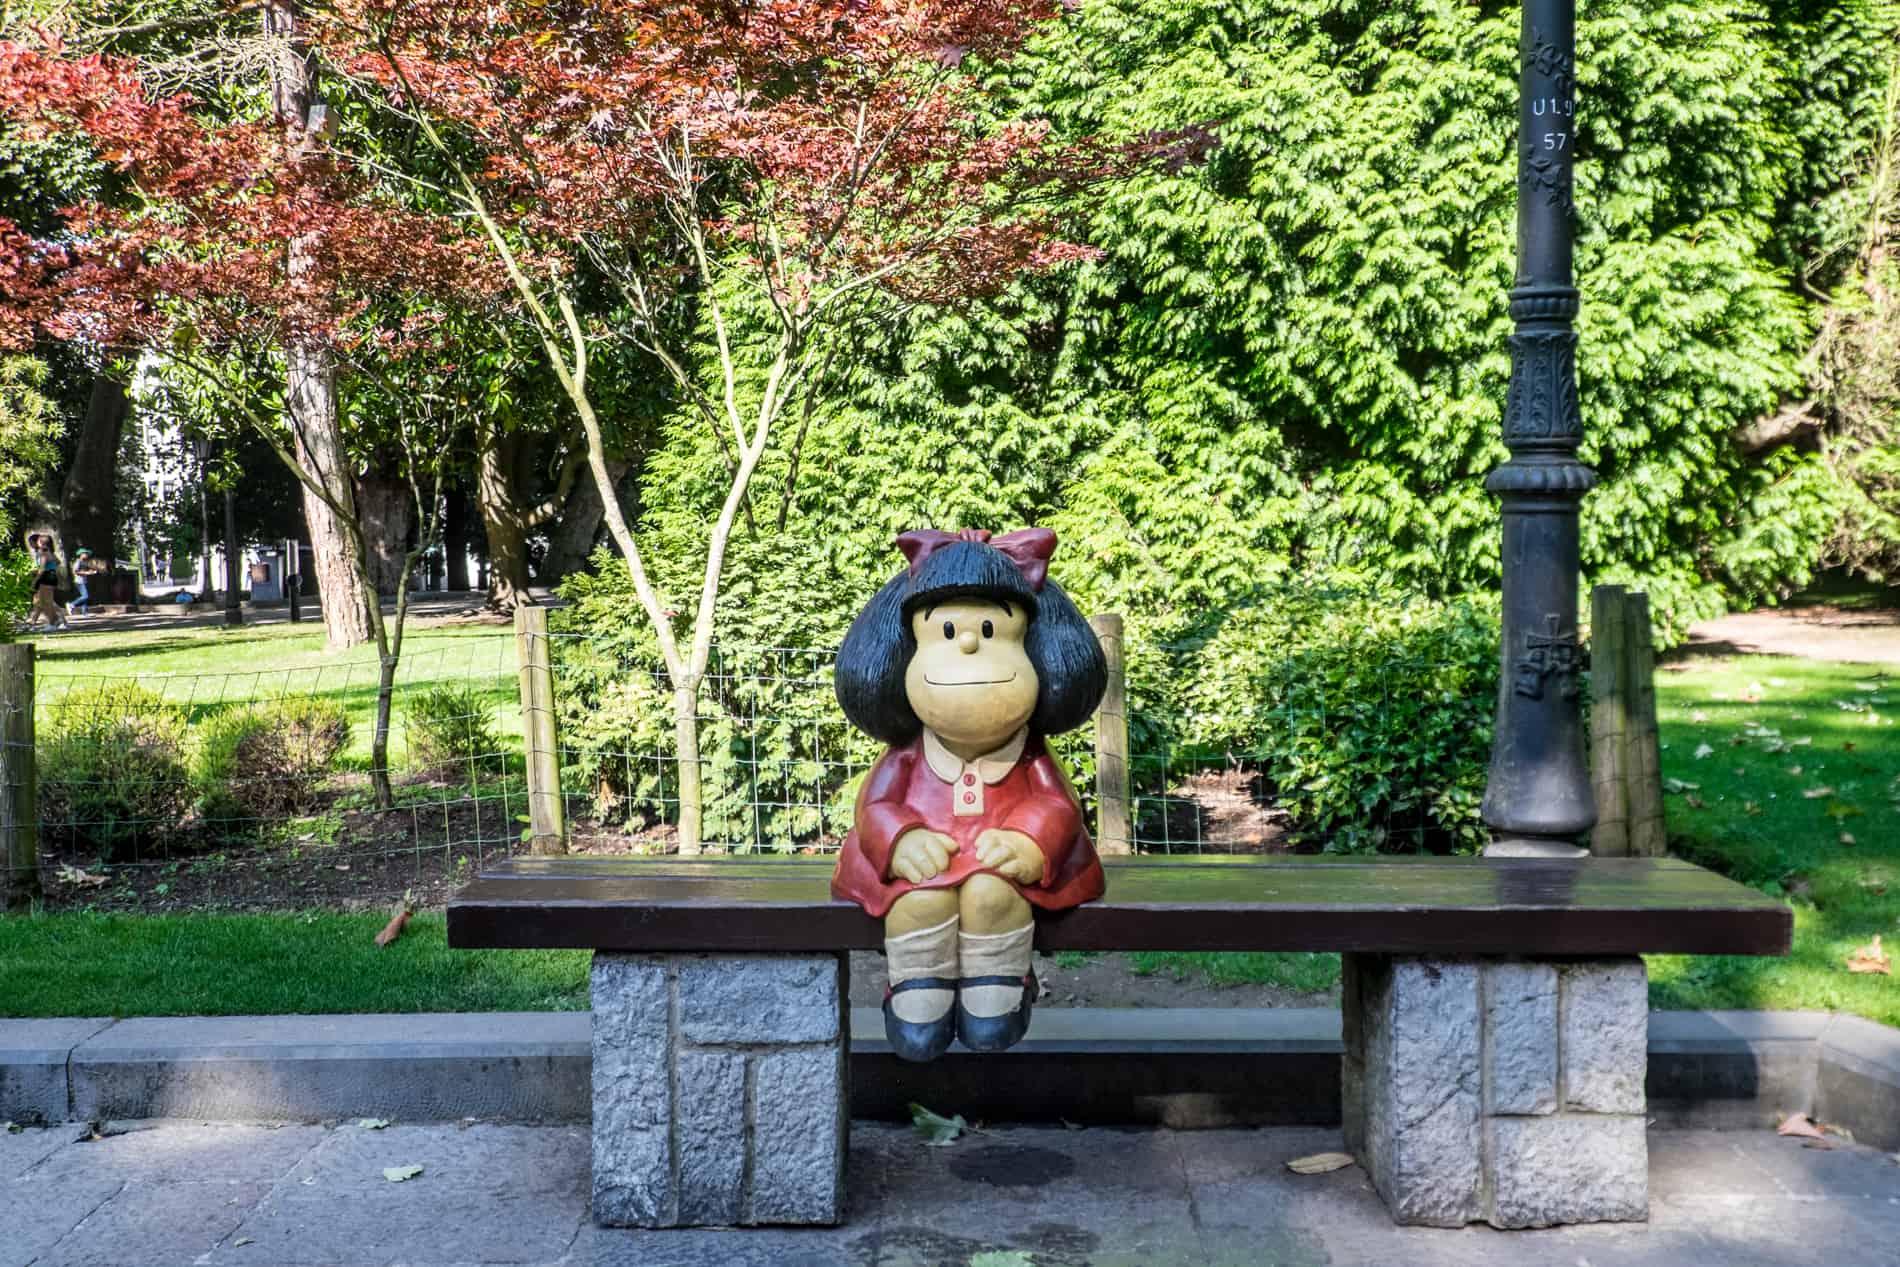 The 'Mafalda' sculpture in Oviedo is an Argentine satirical cartoon character with black hair and a red dress. She sits on a bench in San Francisco Park.